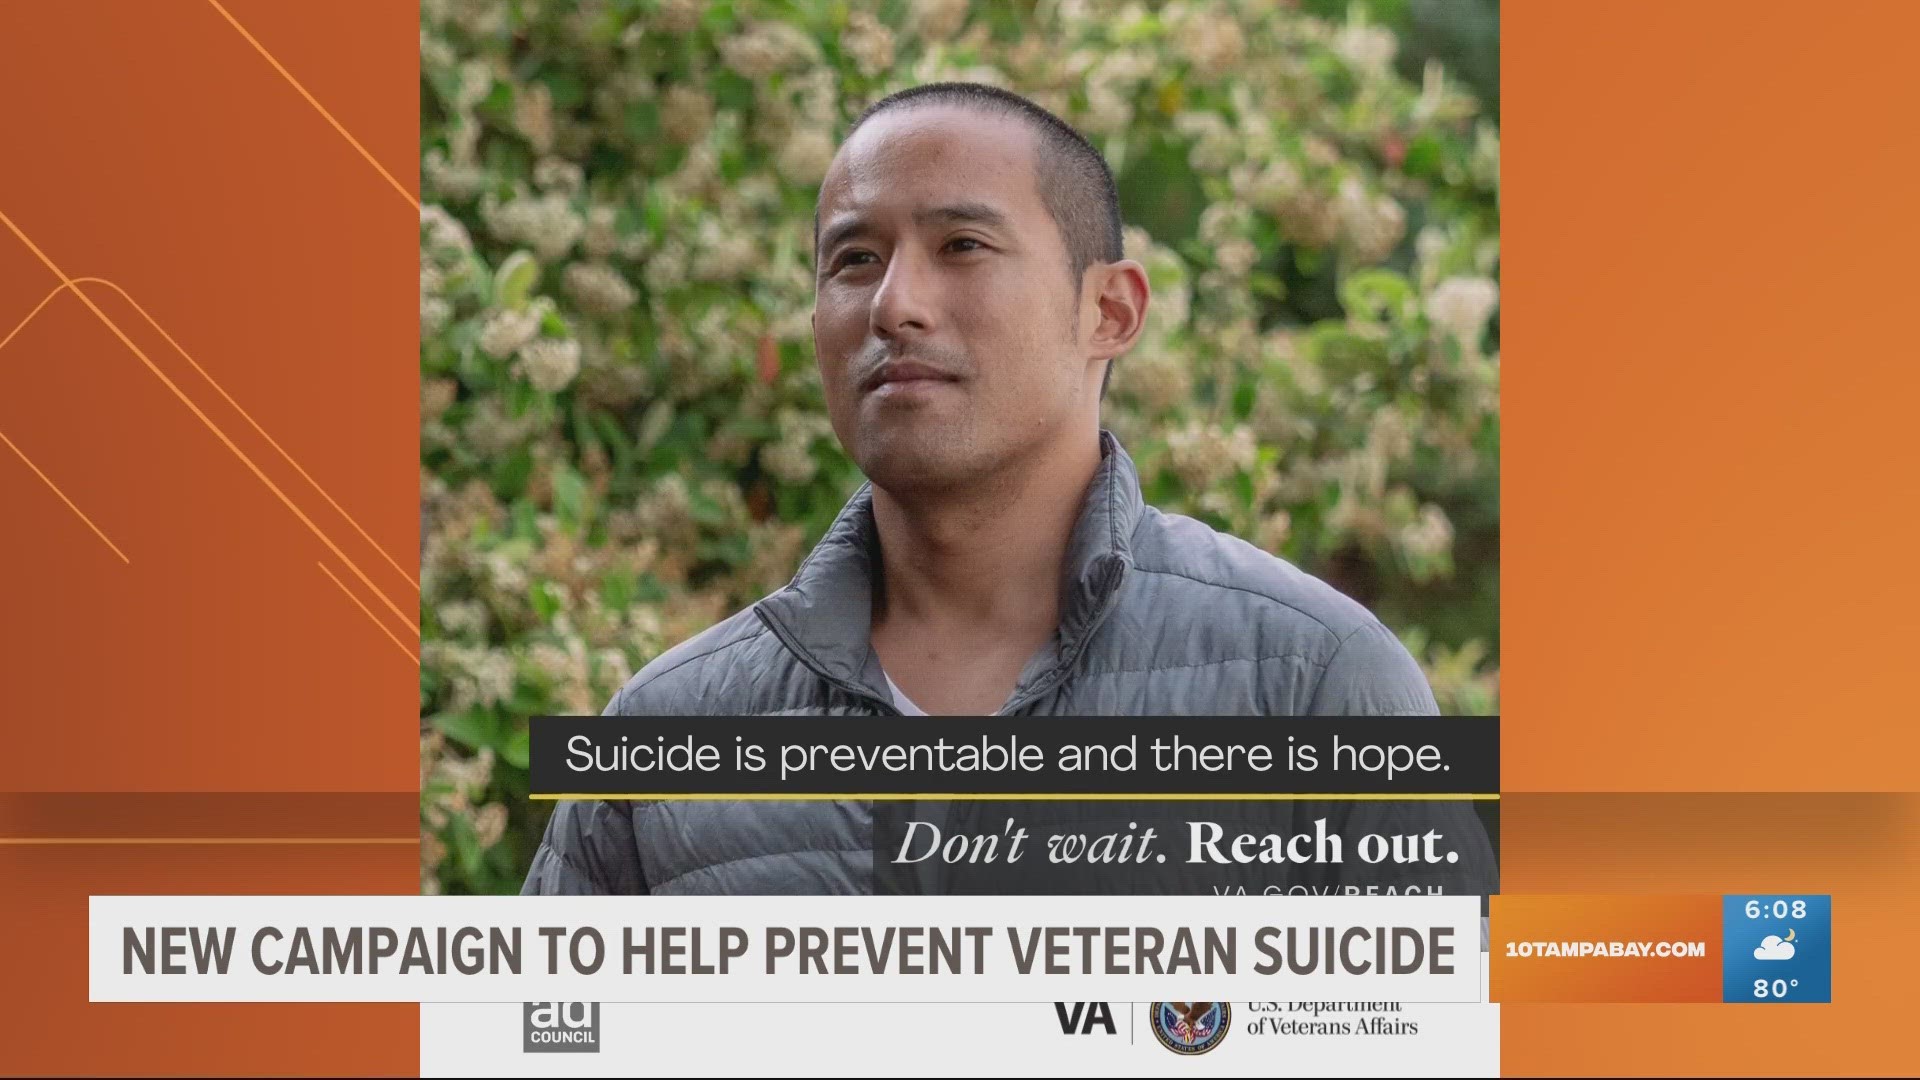 The VA has created a website to provide local resources to veterans who are struggling.